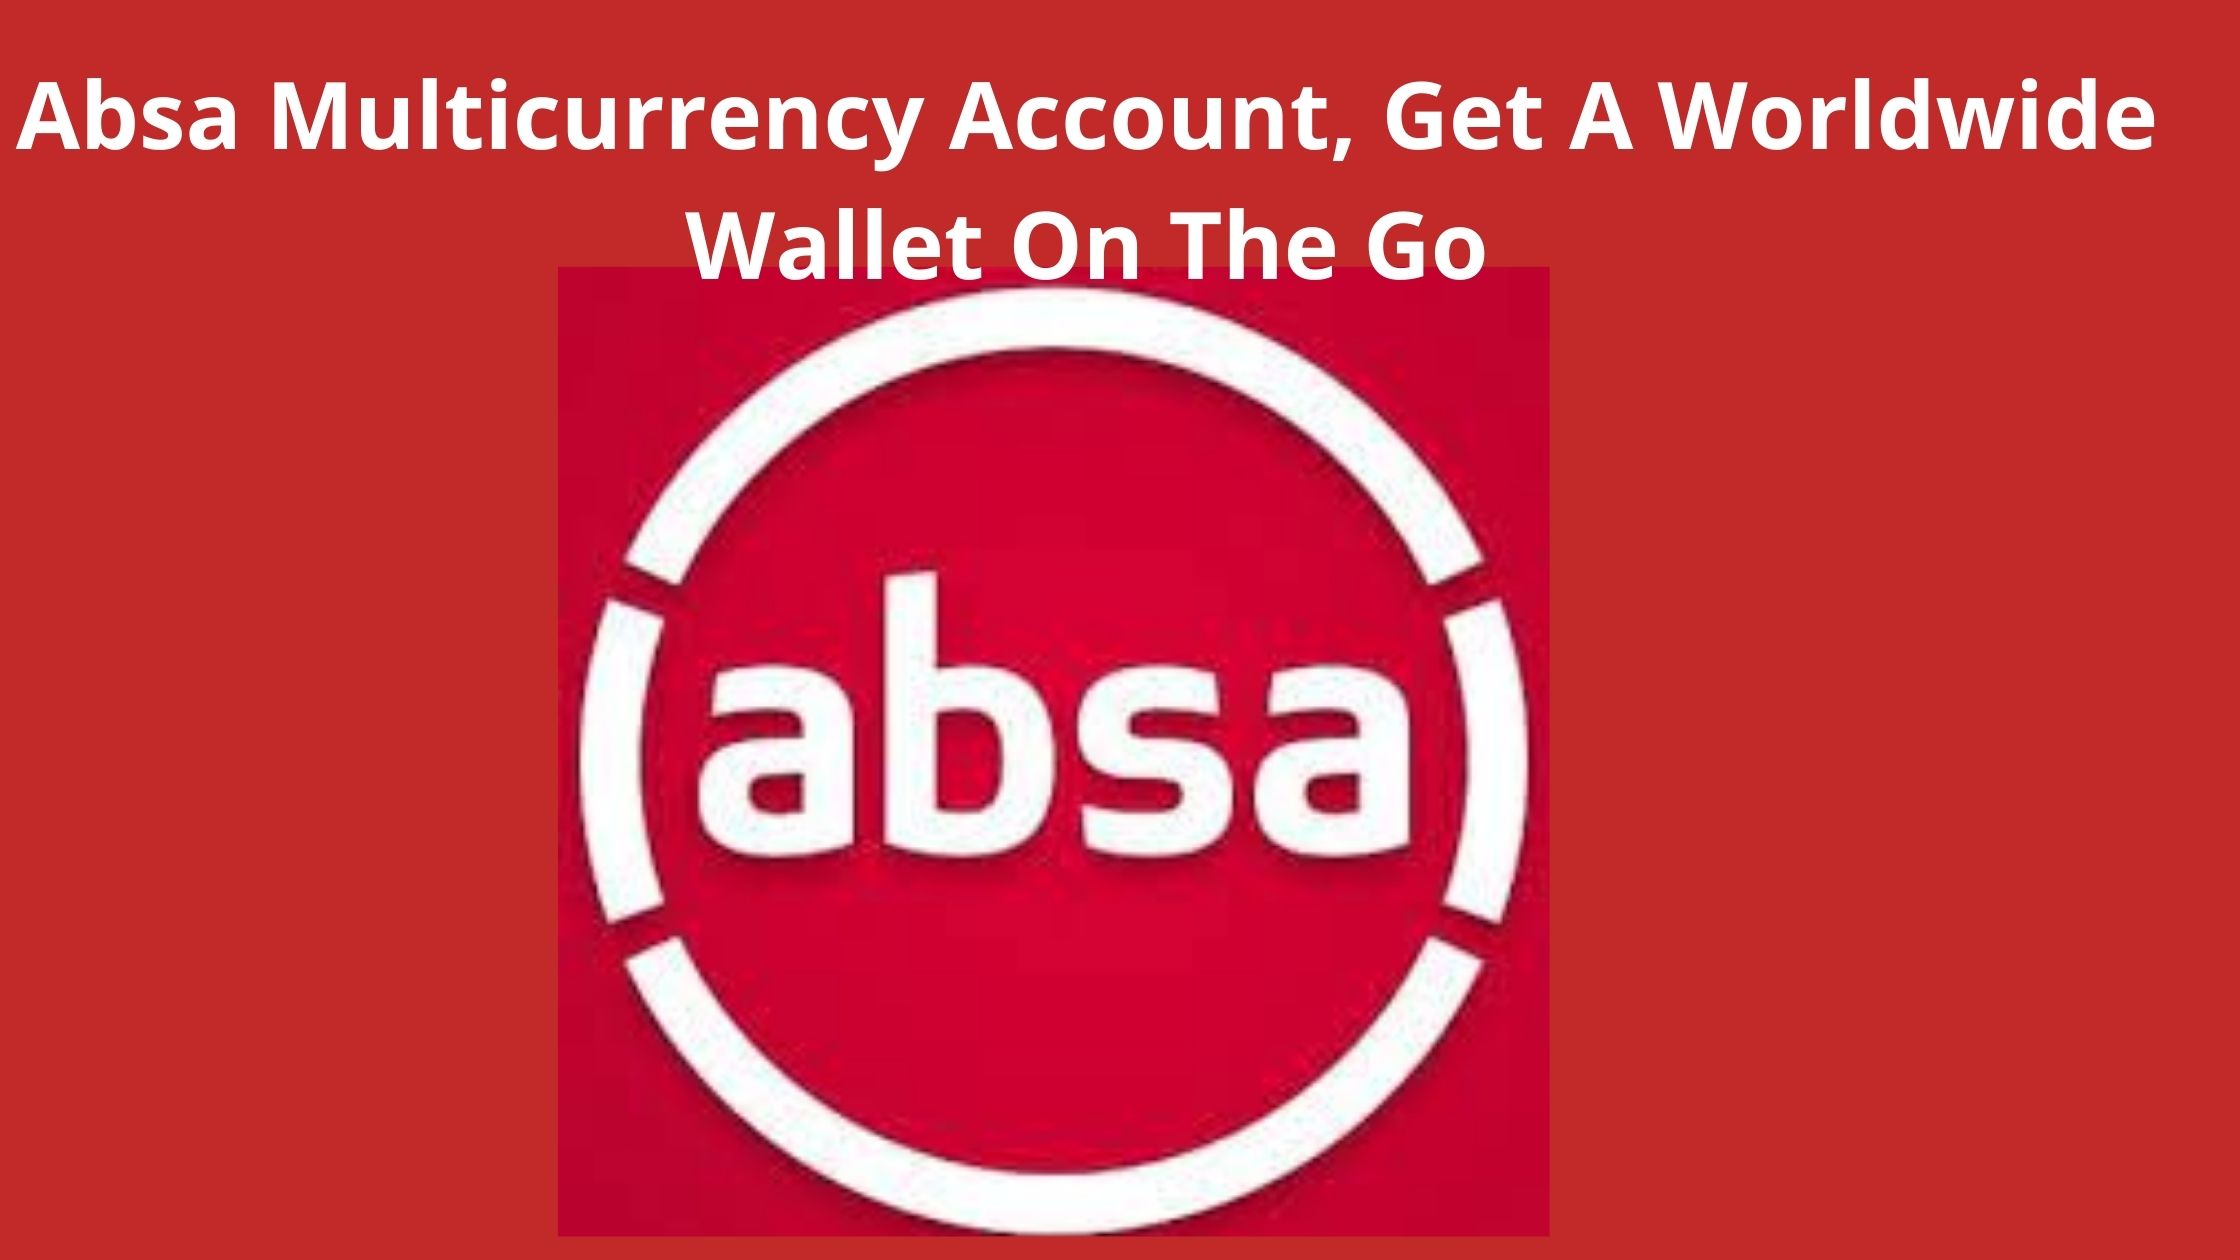 absa-multicurrency-account-get-a-worldwide-wallet-on-the-go